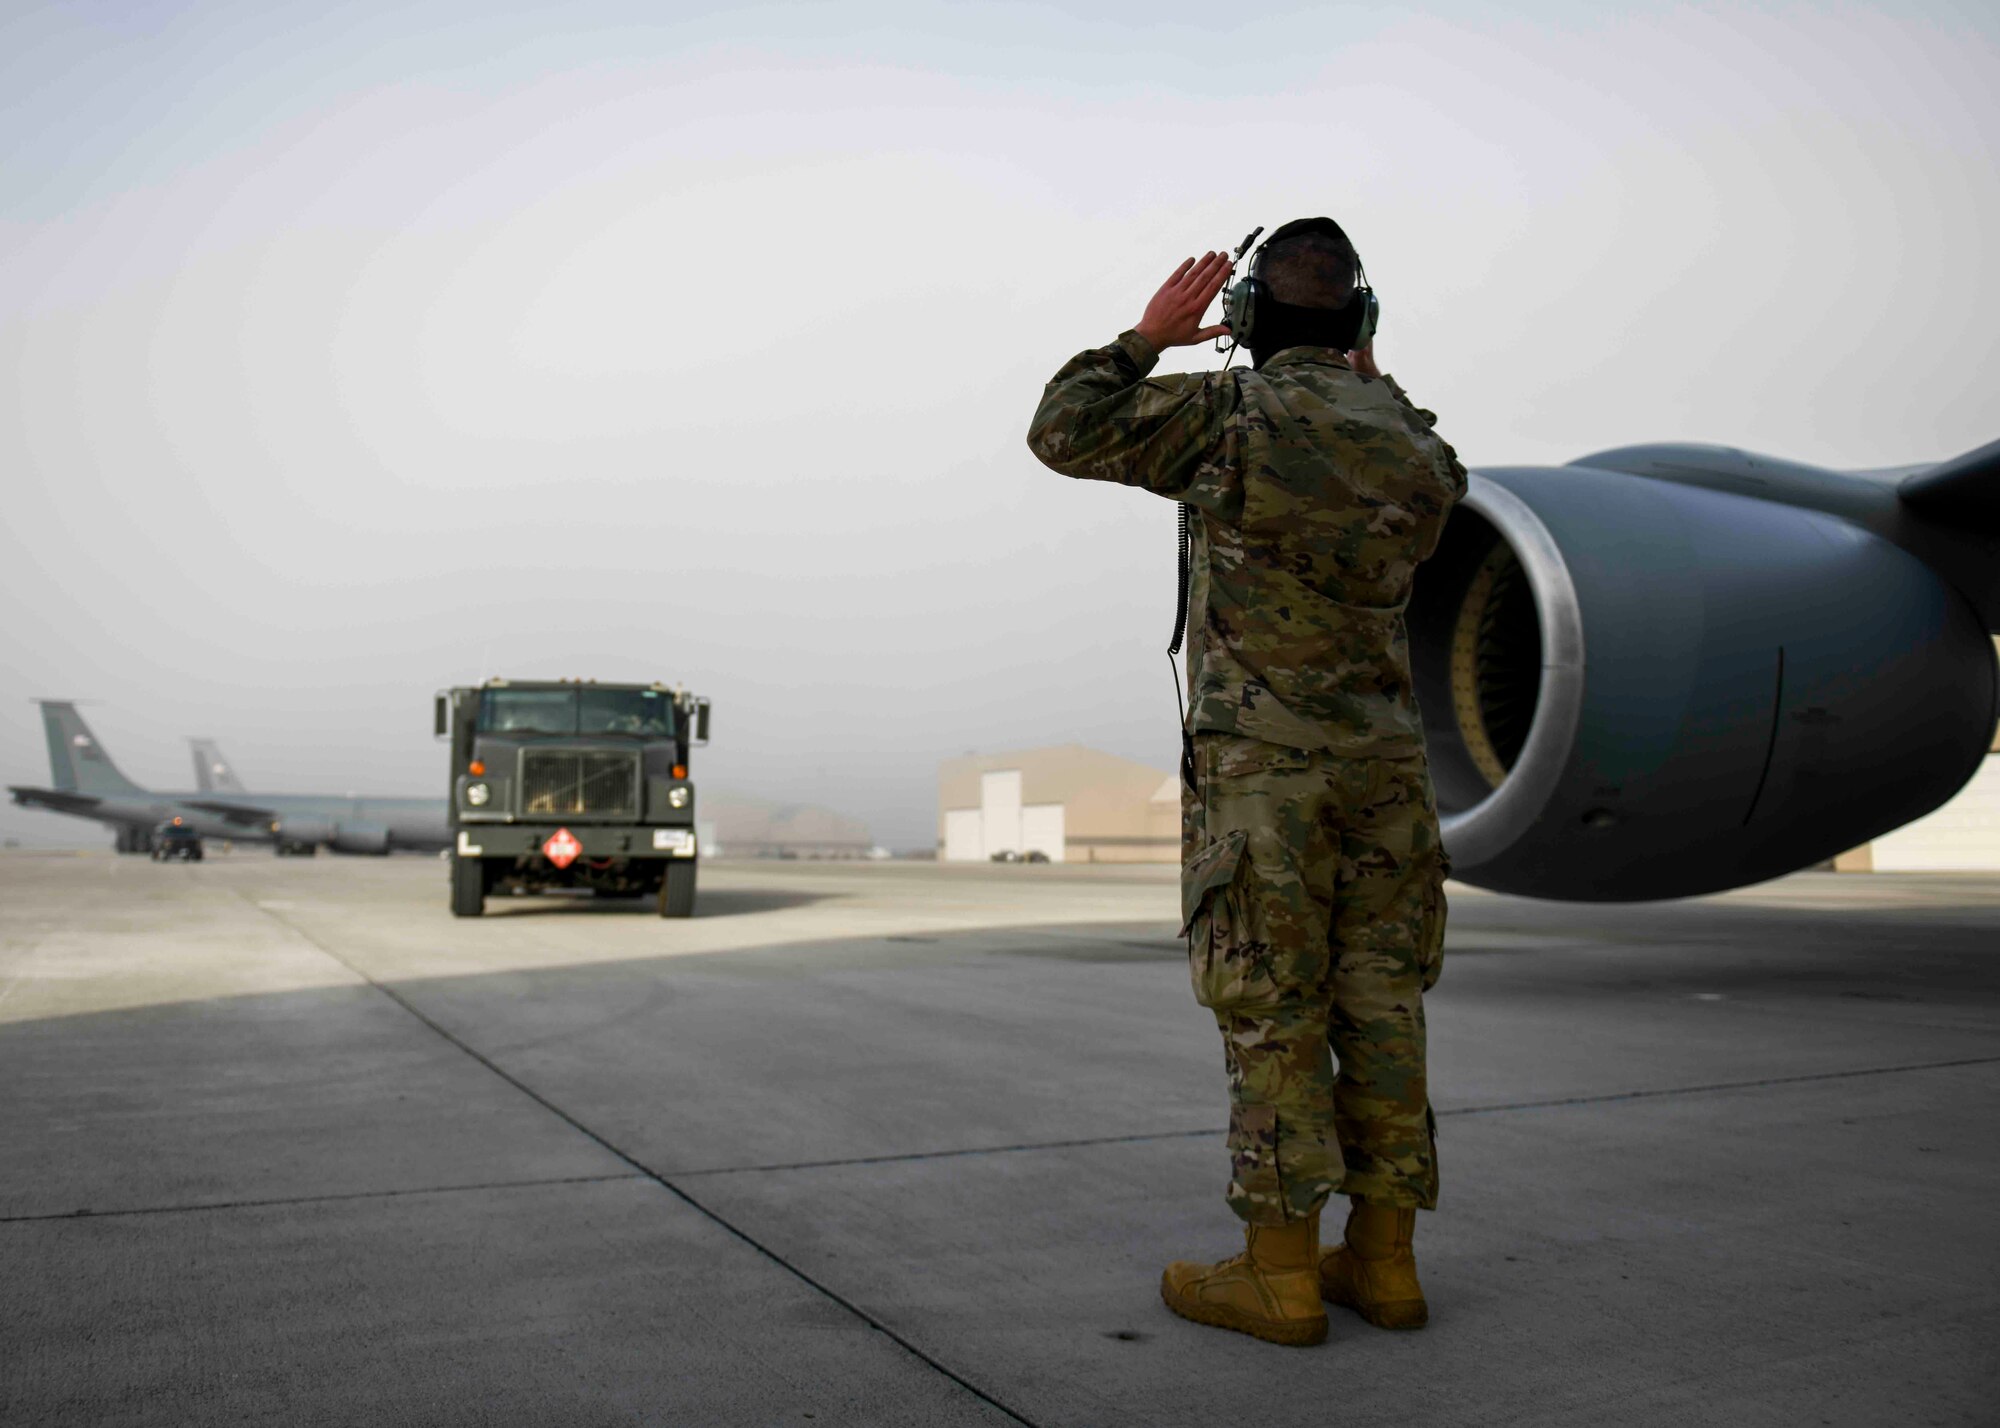 A 92nd Maintenance Squadron Airman guides a fuels truck toward a KC-135 Stratotanker in preparation for hot pit refueling on Fairchild Air Force Base, Washington, March 25, 2021. Being the first base in the Continental U.S. to bring the hot pit refueling capability CONUS, this showcases the innovation and preparedness Team Fairchild and the Air Mobility Command possess and implements. (U.S. Air Force photo by Airman 1st Class Kiaundra Miller)